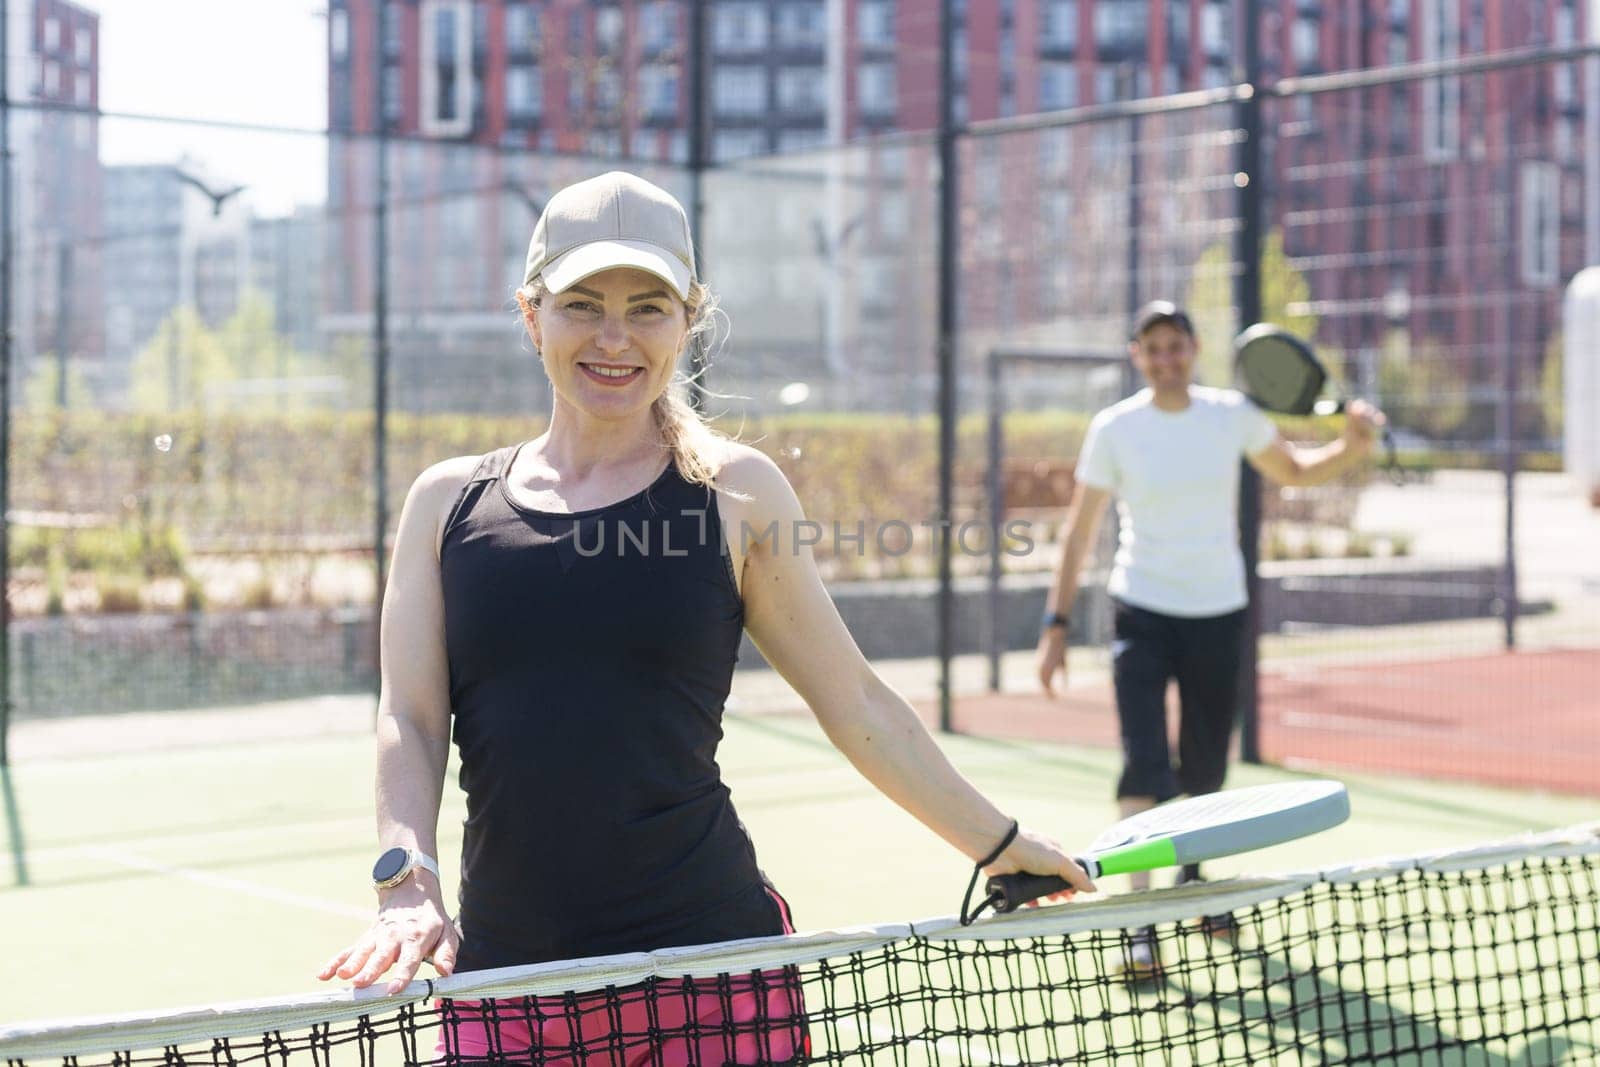 Portrait of positive young woman and adult man standing on padel tennis court, holding racket and ball, smiling. High quality photo